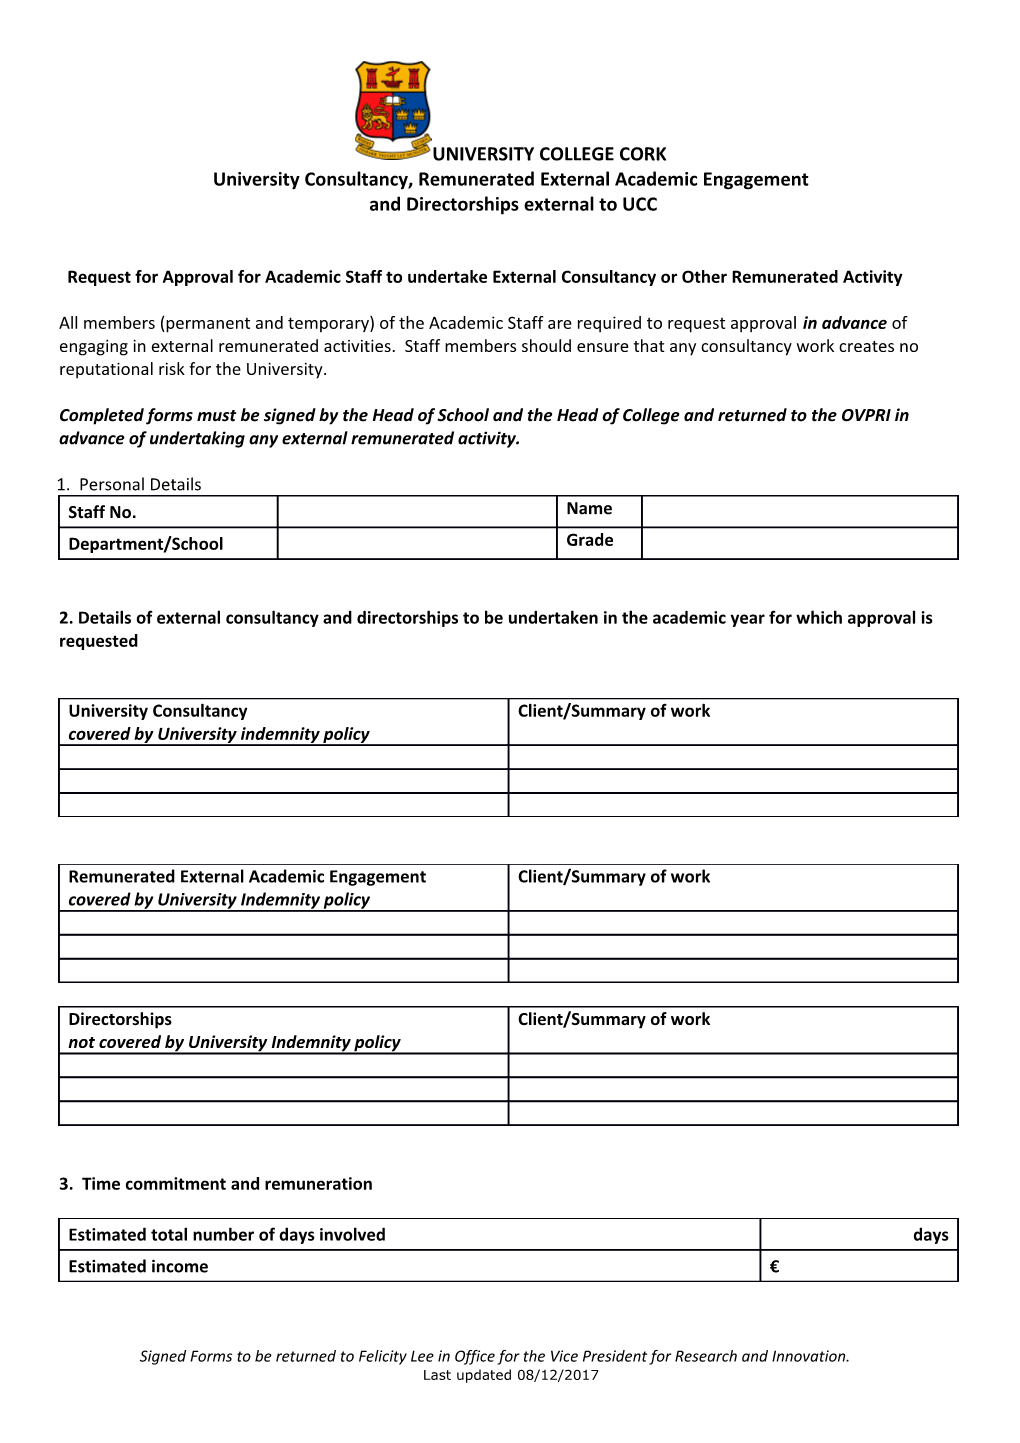 Request for Approval for Academic Staff to Undertake External Consultancy Or Other Remunerated